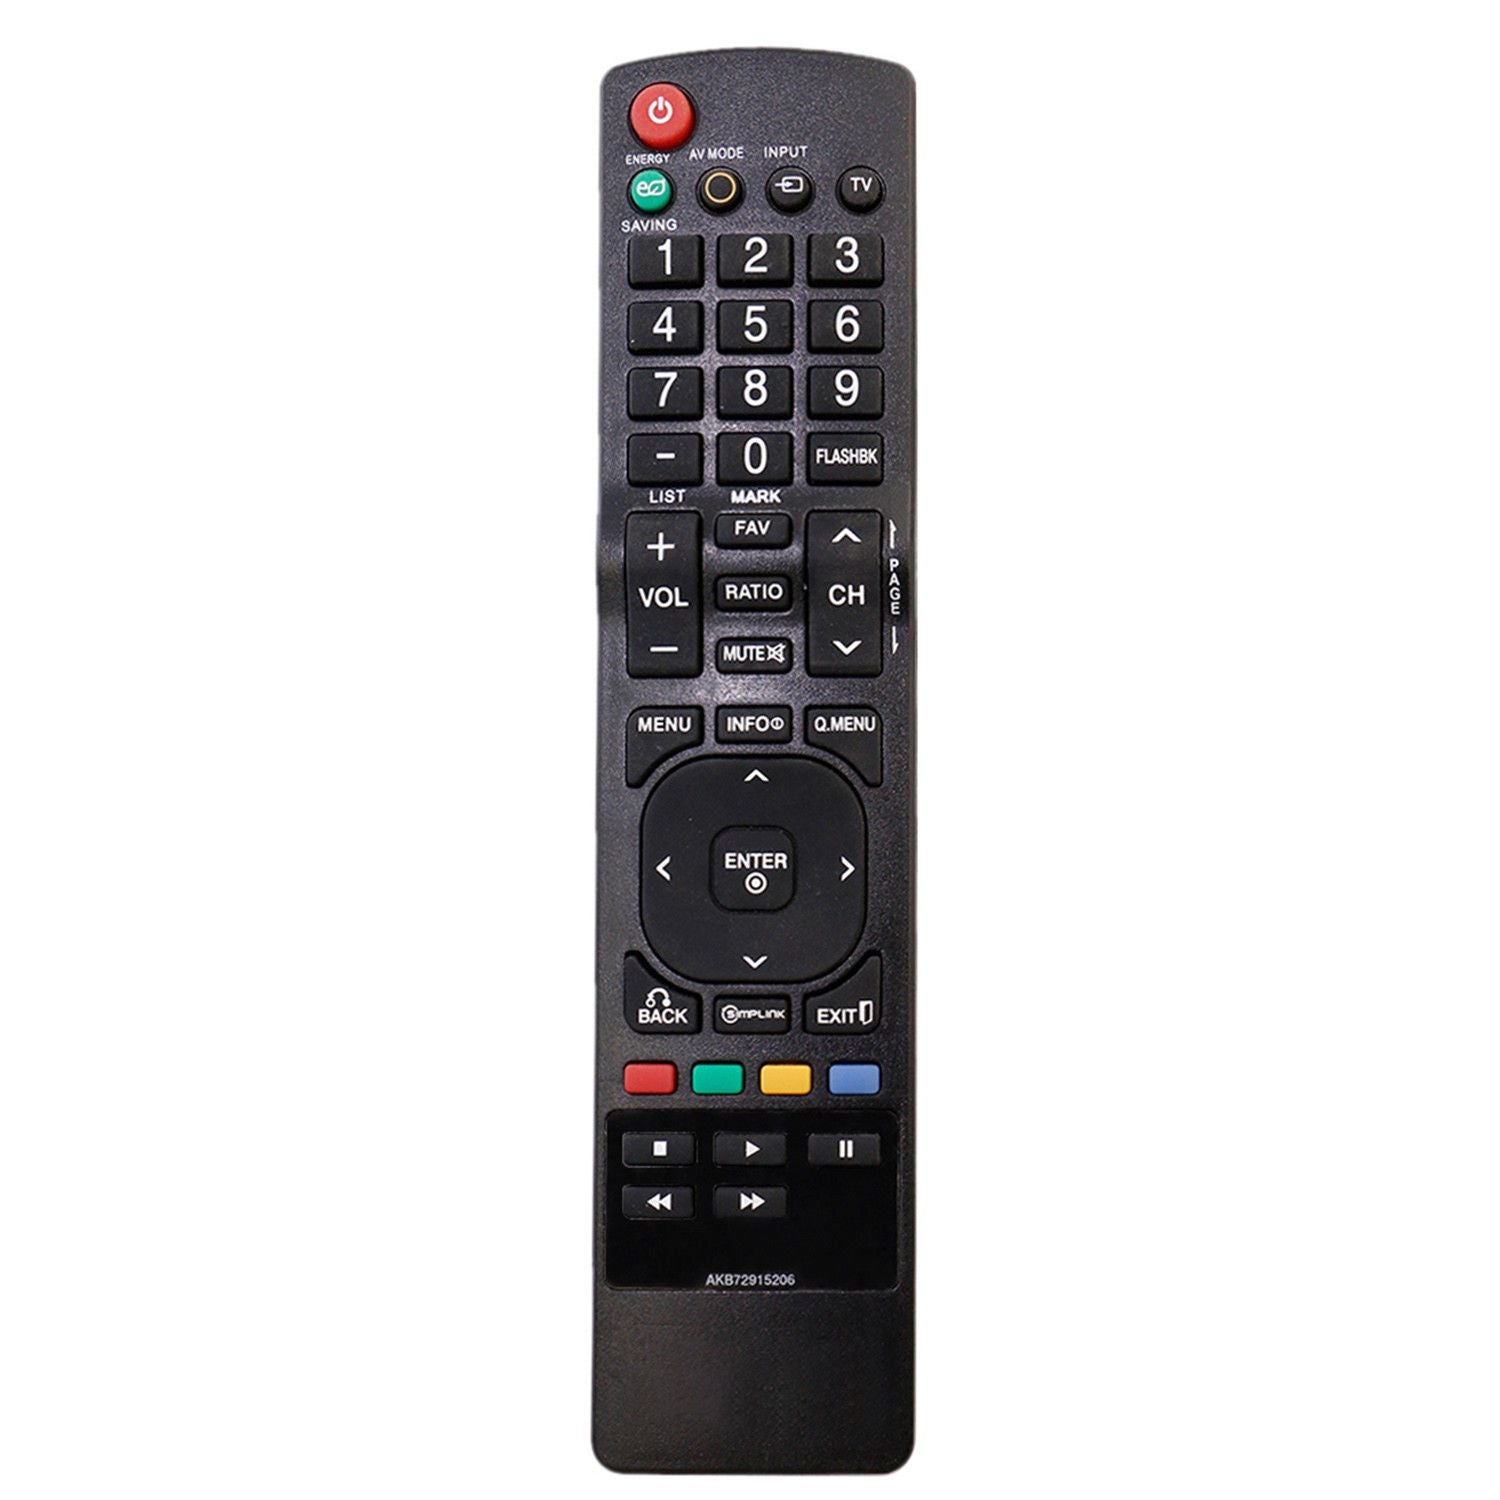 AKB72915206 Replacement Remote Control for LG TV 26LD352C 42LX6500 47LX6500 55LX6500